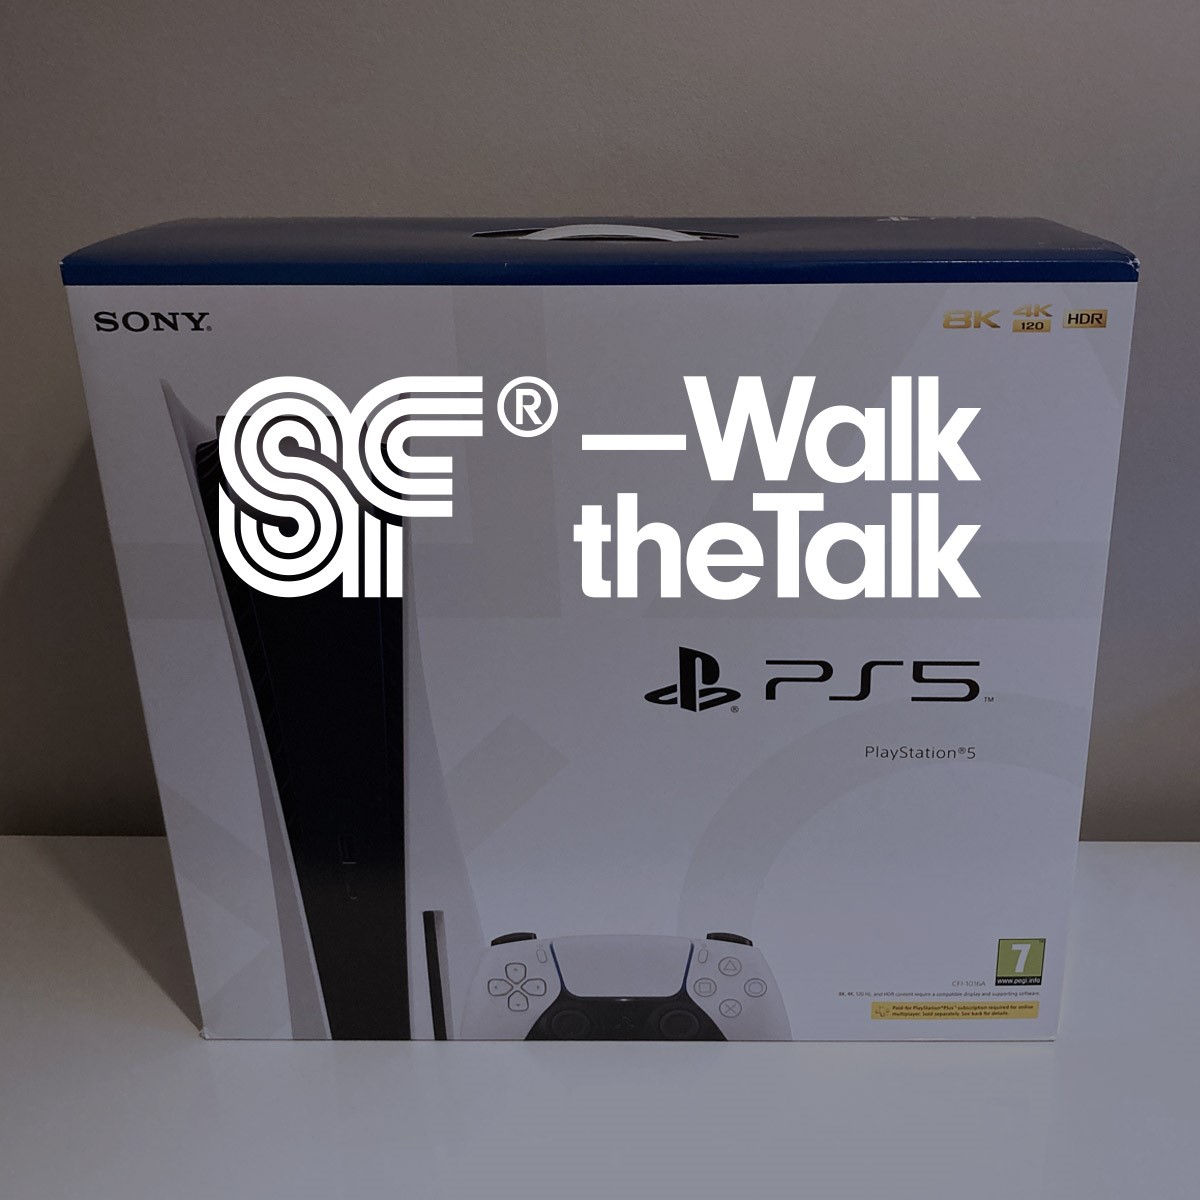 Superfried – Walk the Talk. Buying a games console. Considering purchases as part of my transition to reducing my environmental impact.